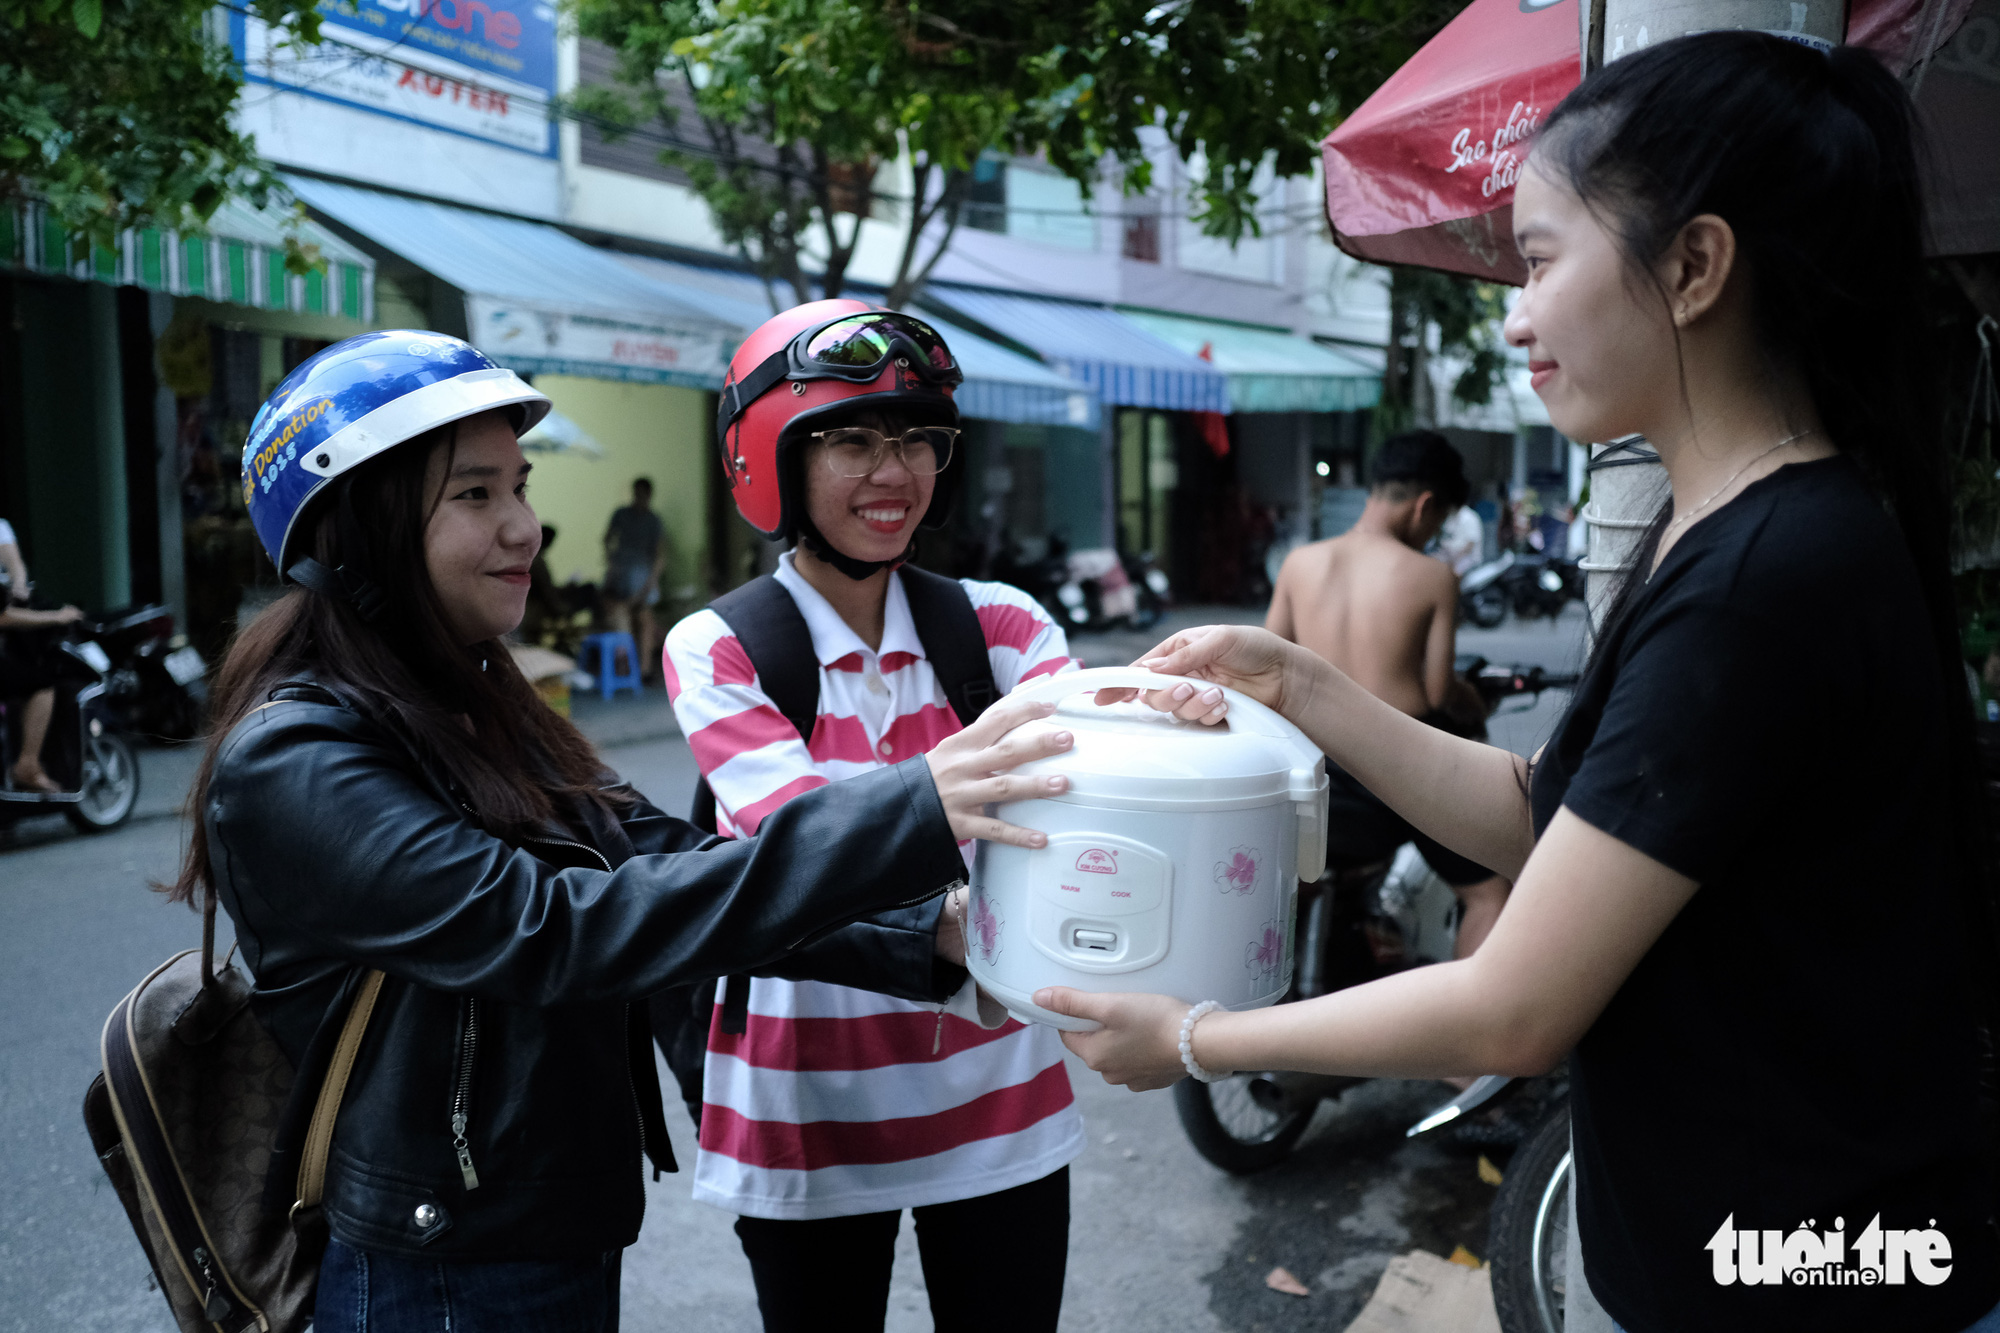 Trash to treasure: Da Nang’s ‘Give and Take’ app helps used goods find new owners